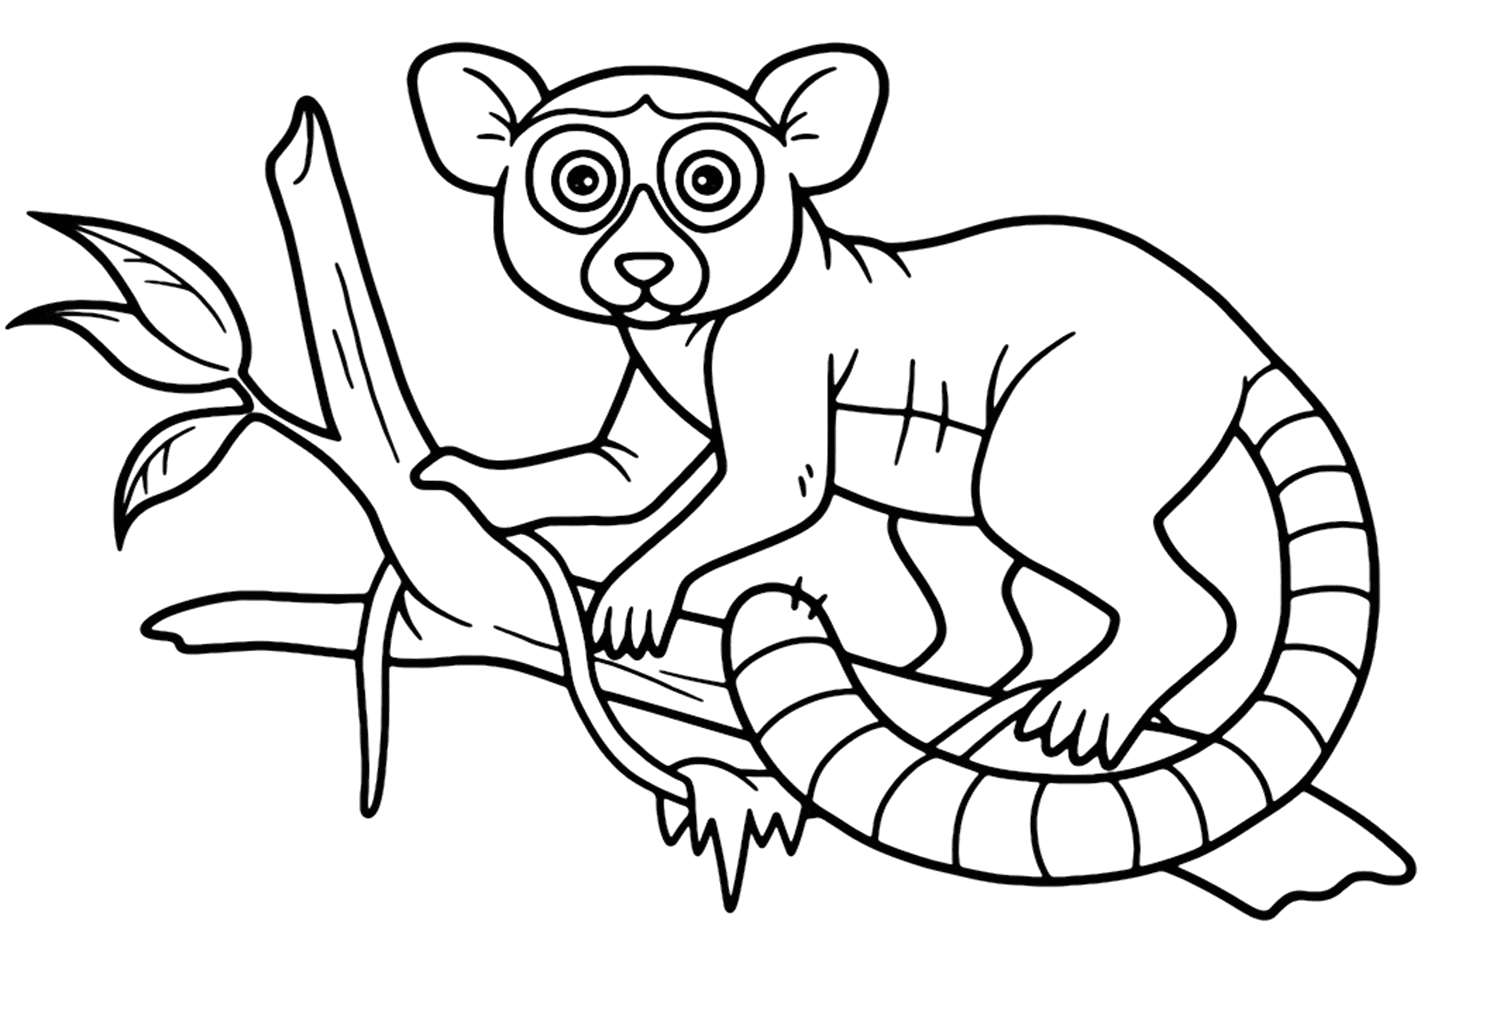 Lemur In A Tree Coloring Page - Free Printable Coloring Pages